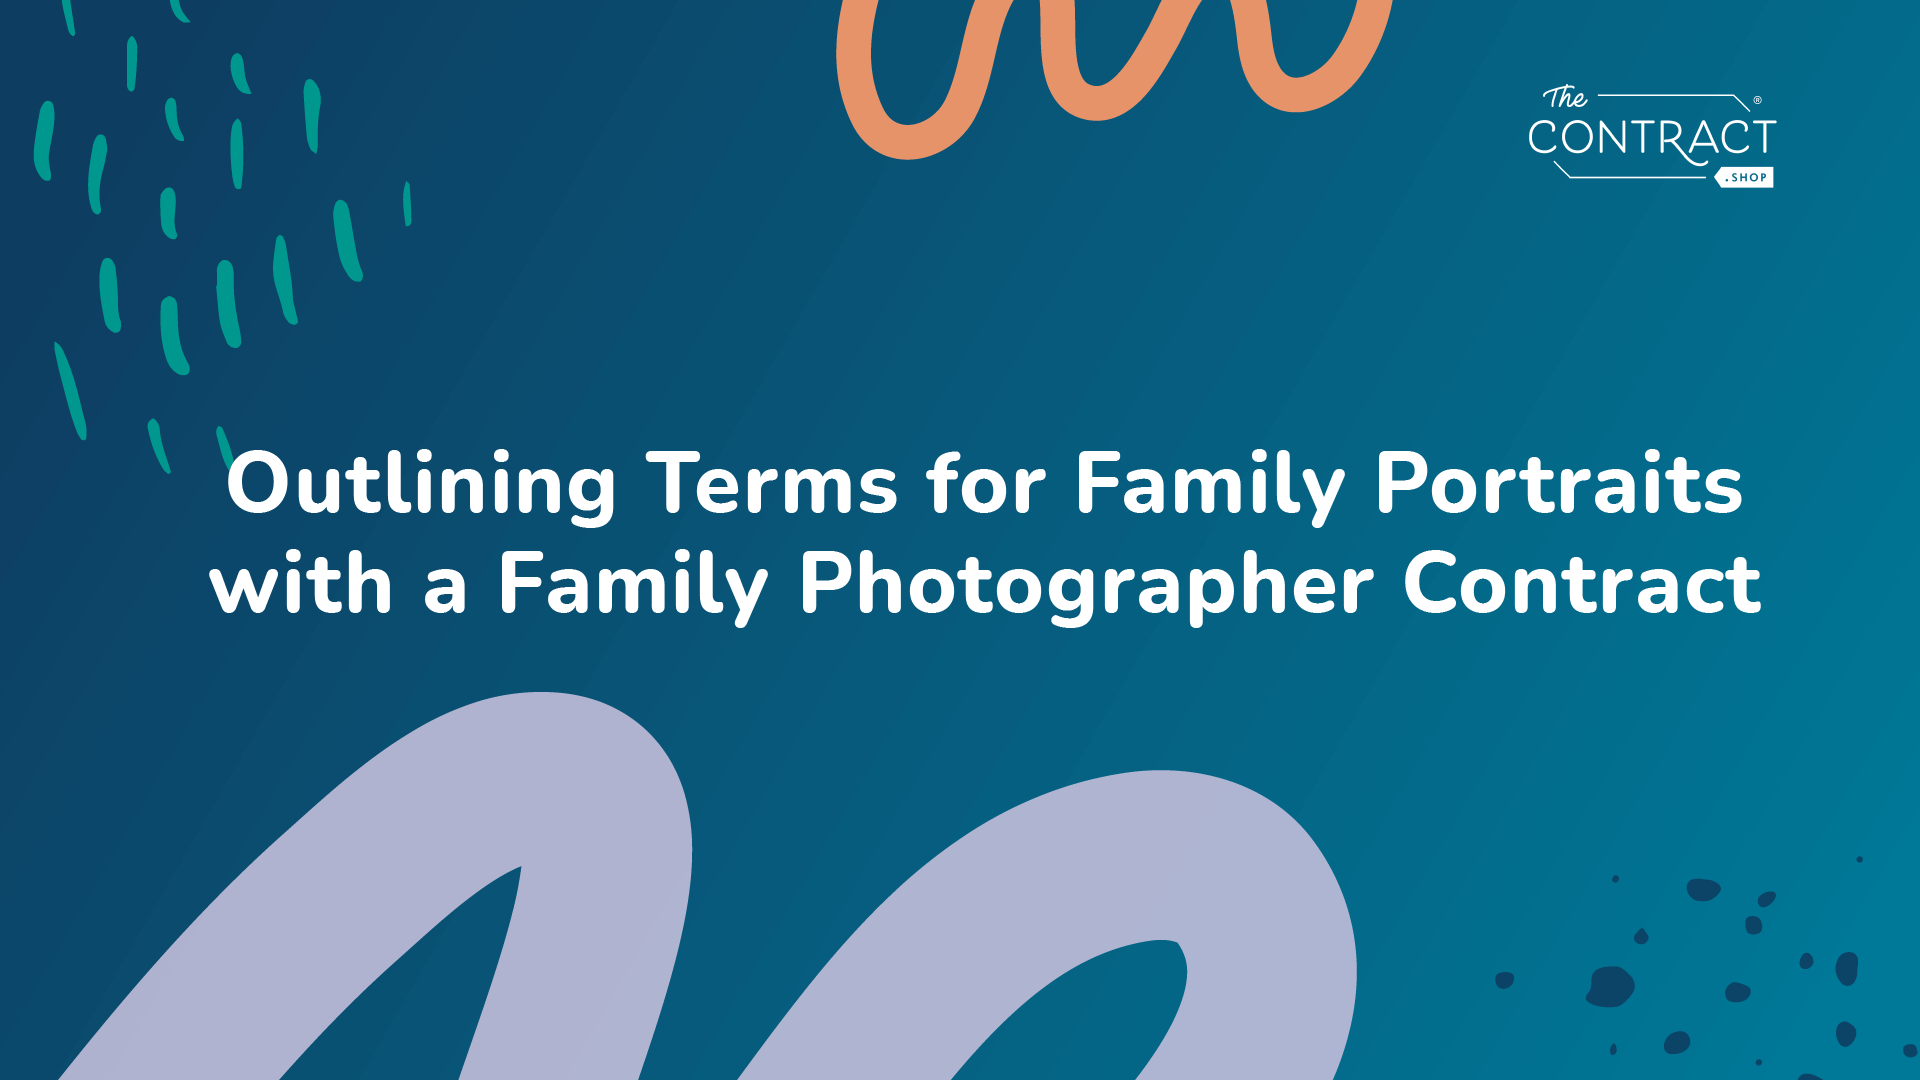 Outlining Terms for Family Portraits with a Family Photographer Contract